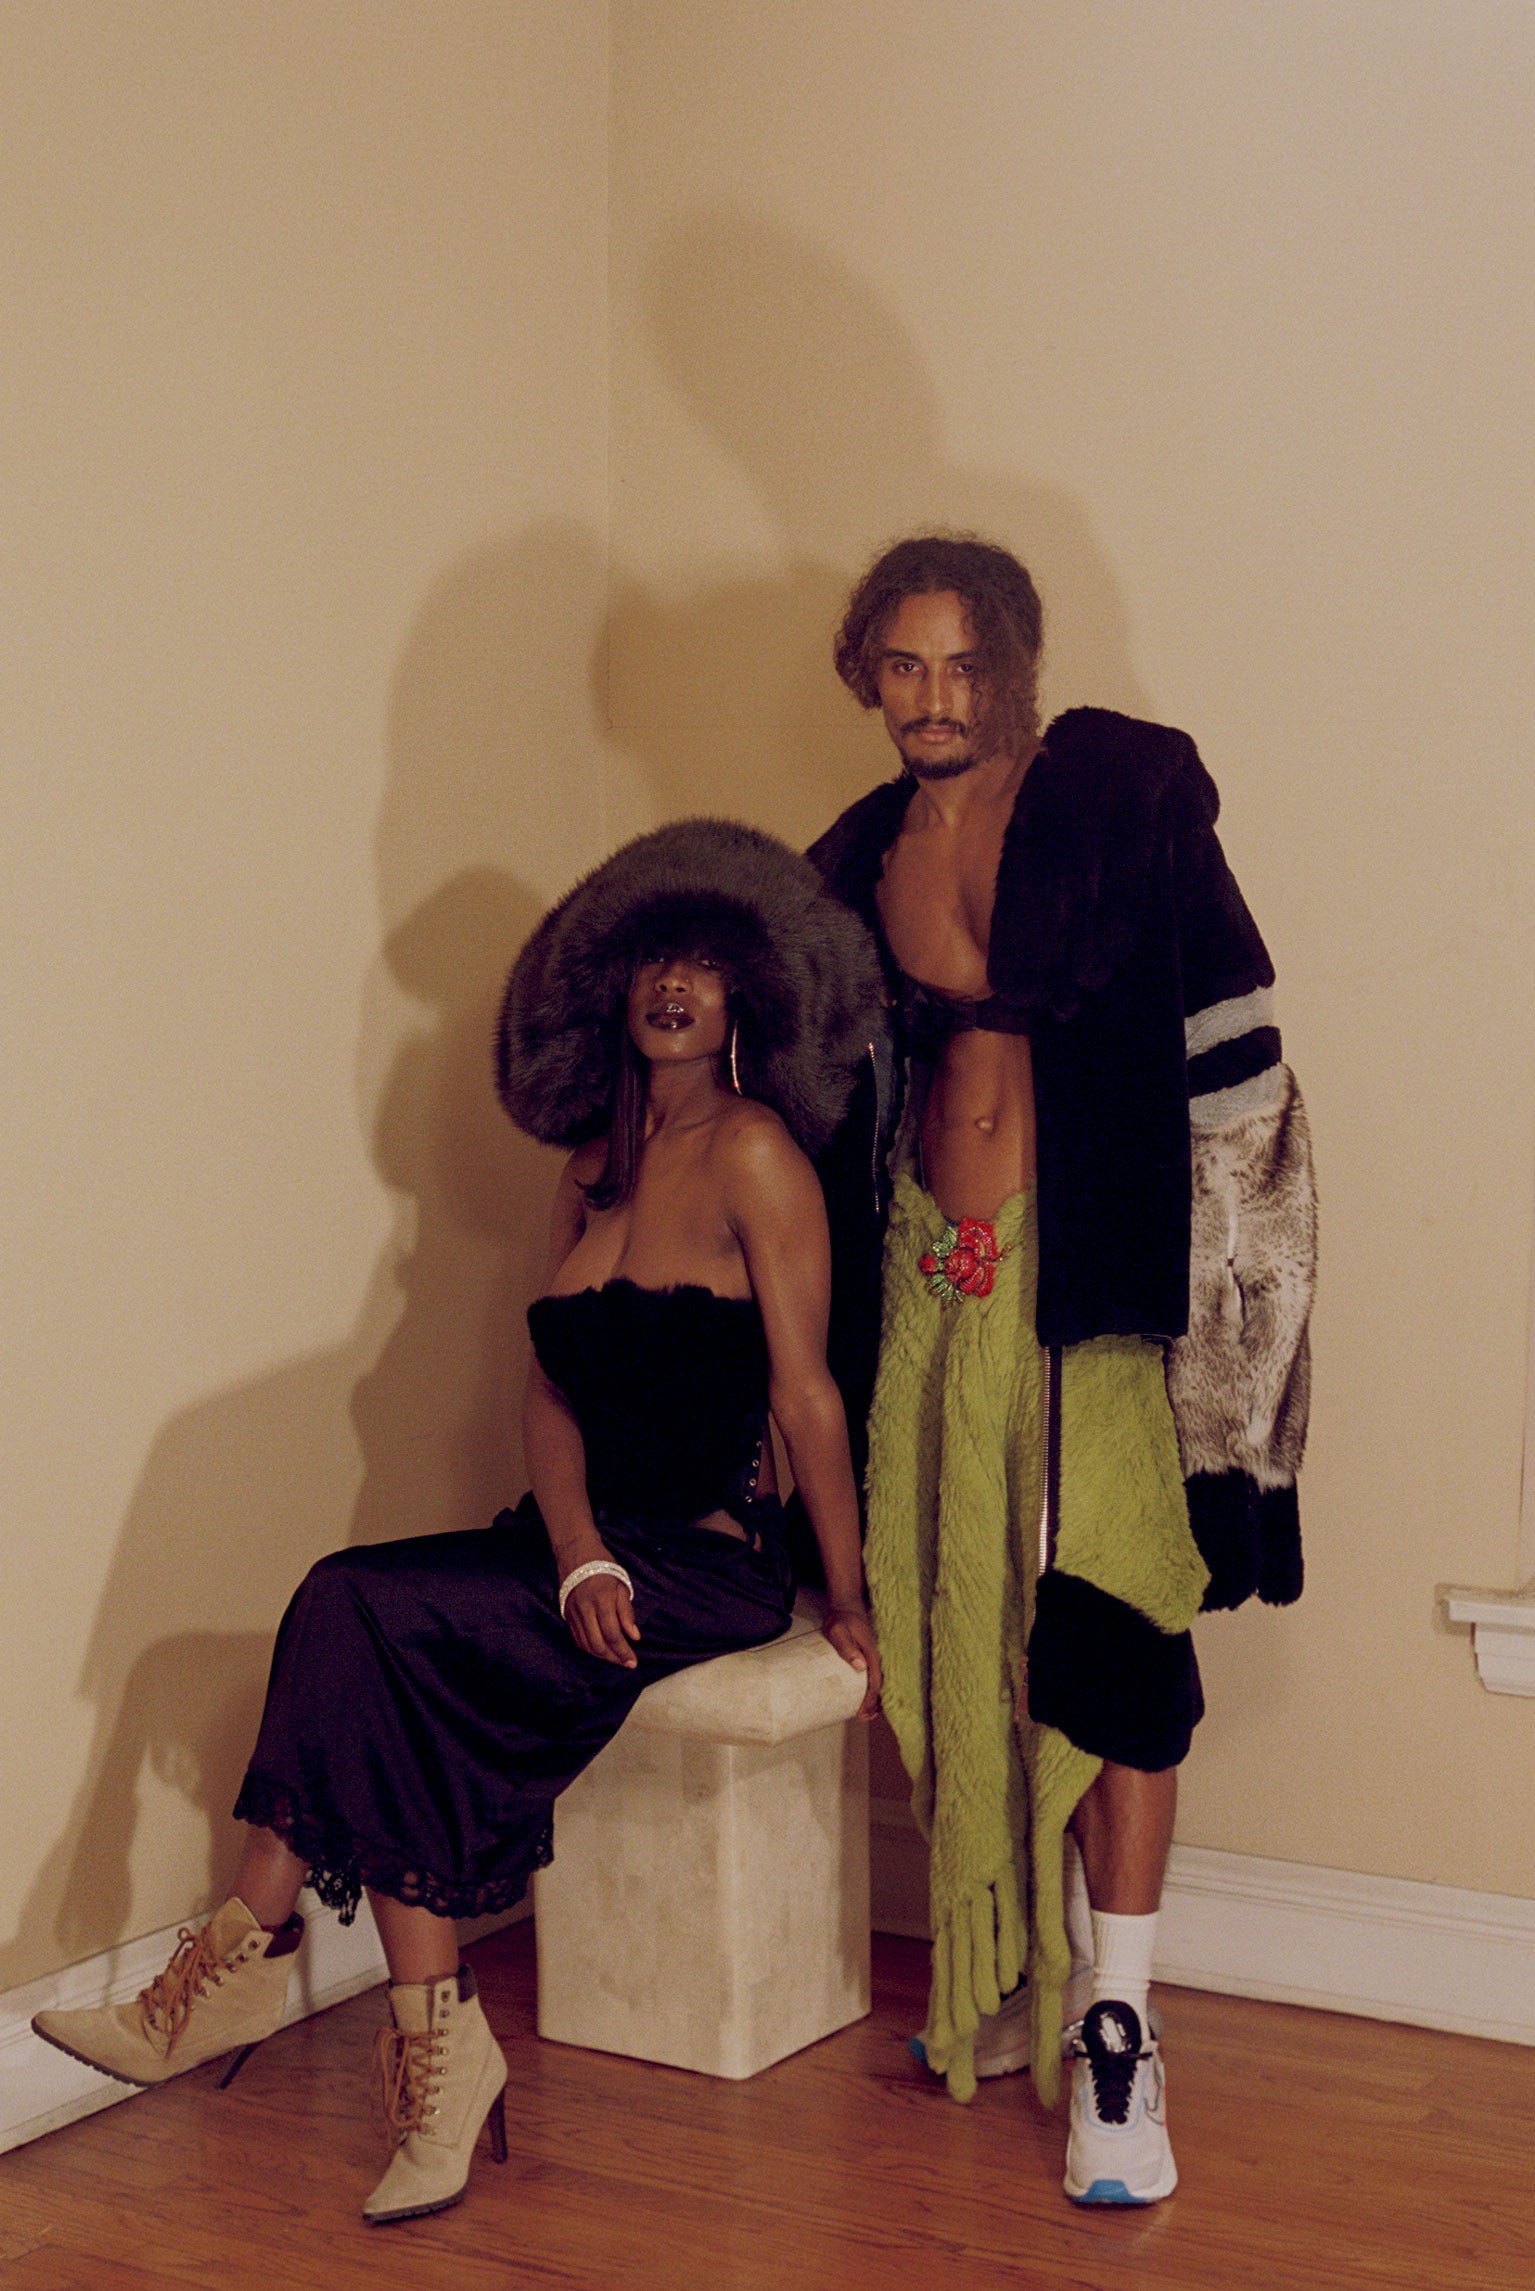 No Sesso's Autumn/Winter 2020 Campaign Pays Homage To The Harlem Renaissance